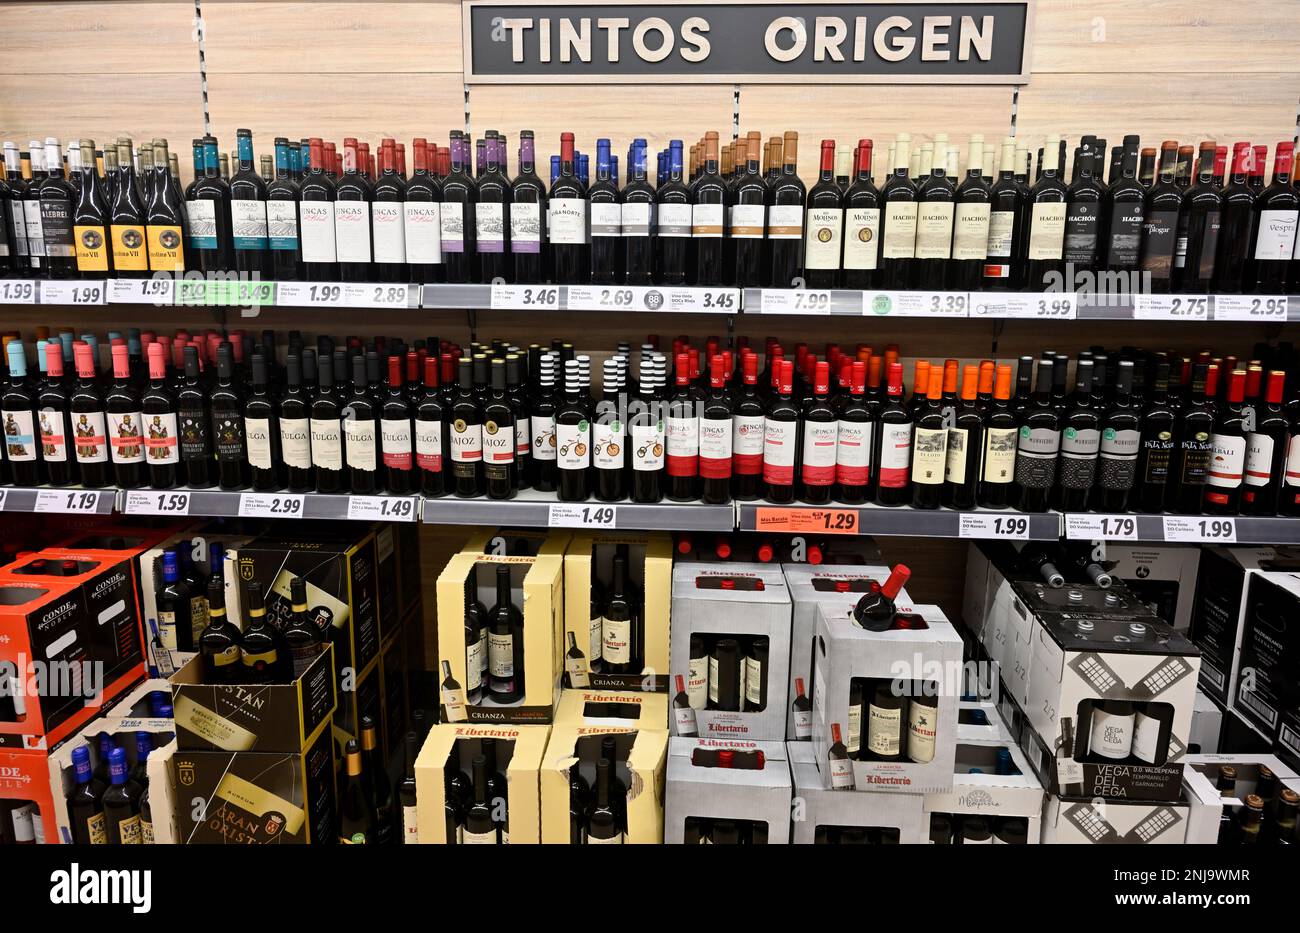 Inside supermarket with selves full of variety of red wines Stock Photo